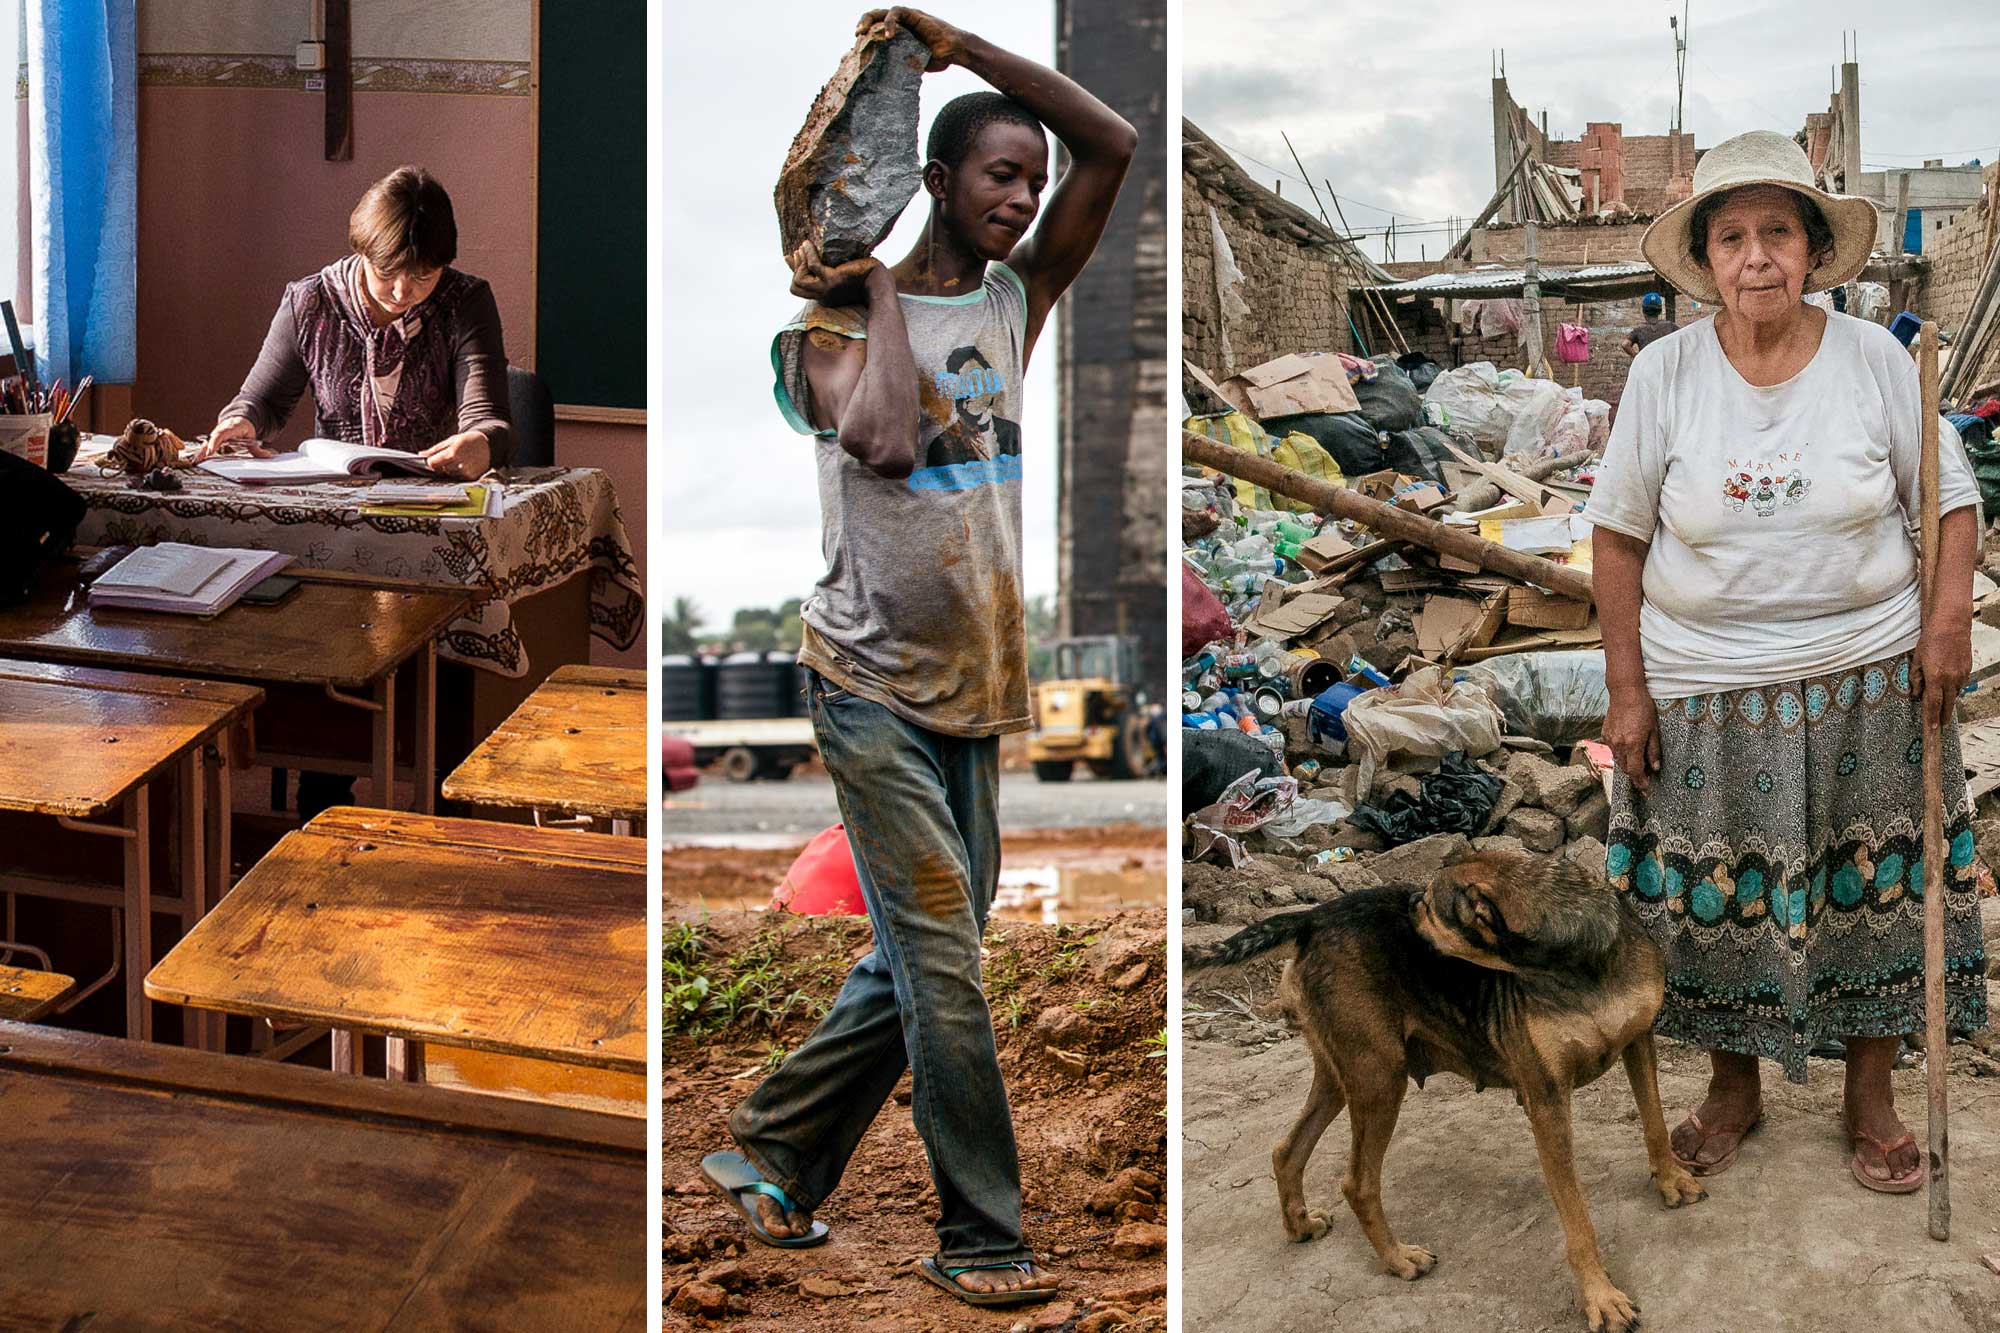 3 photographs, a teacher in school, a man carrying a rock, a woman stadning with her dog amidst rubble